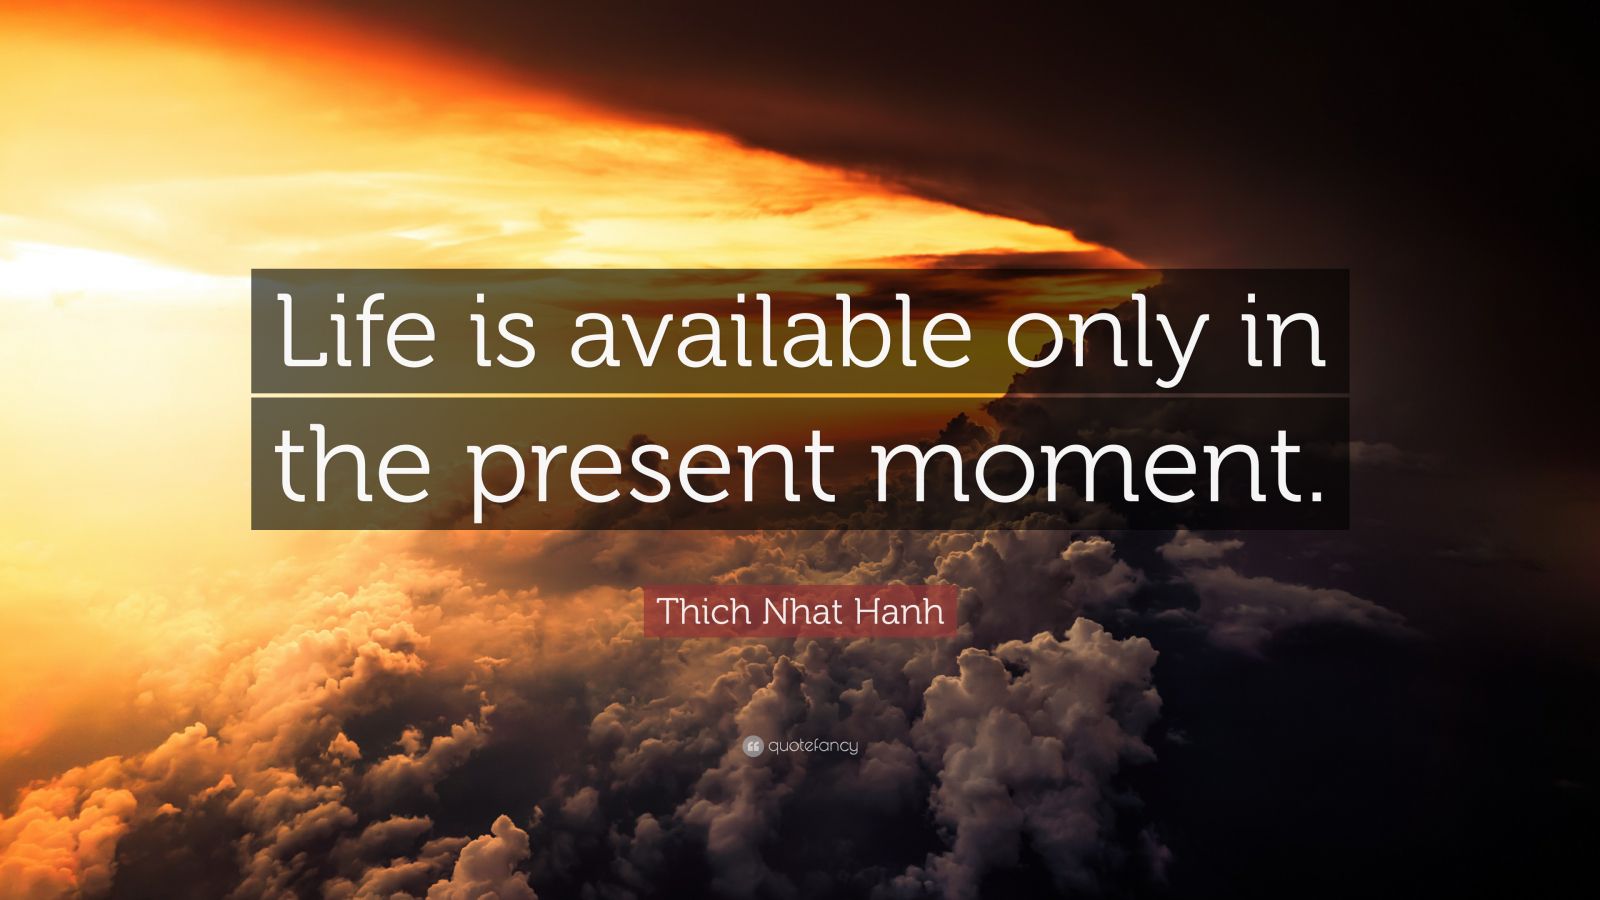 Thich Nhat Hanh Quote: “Life is available only in the present moment ...